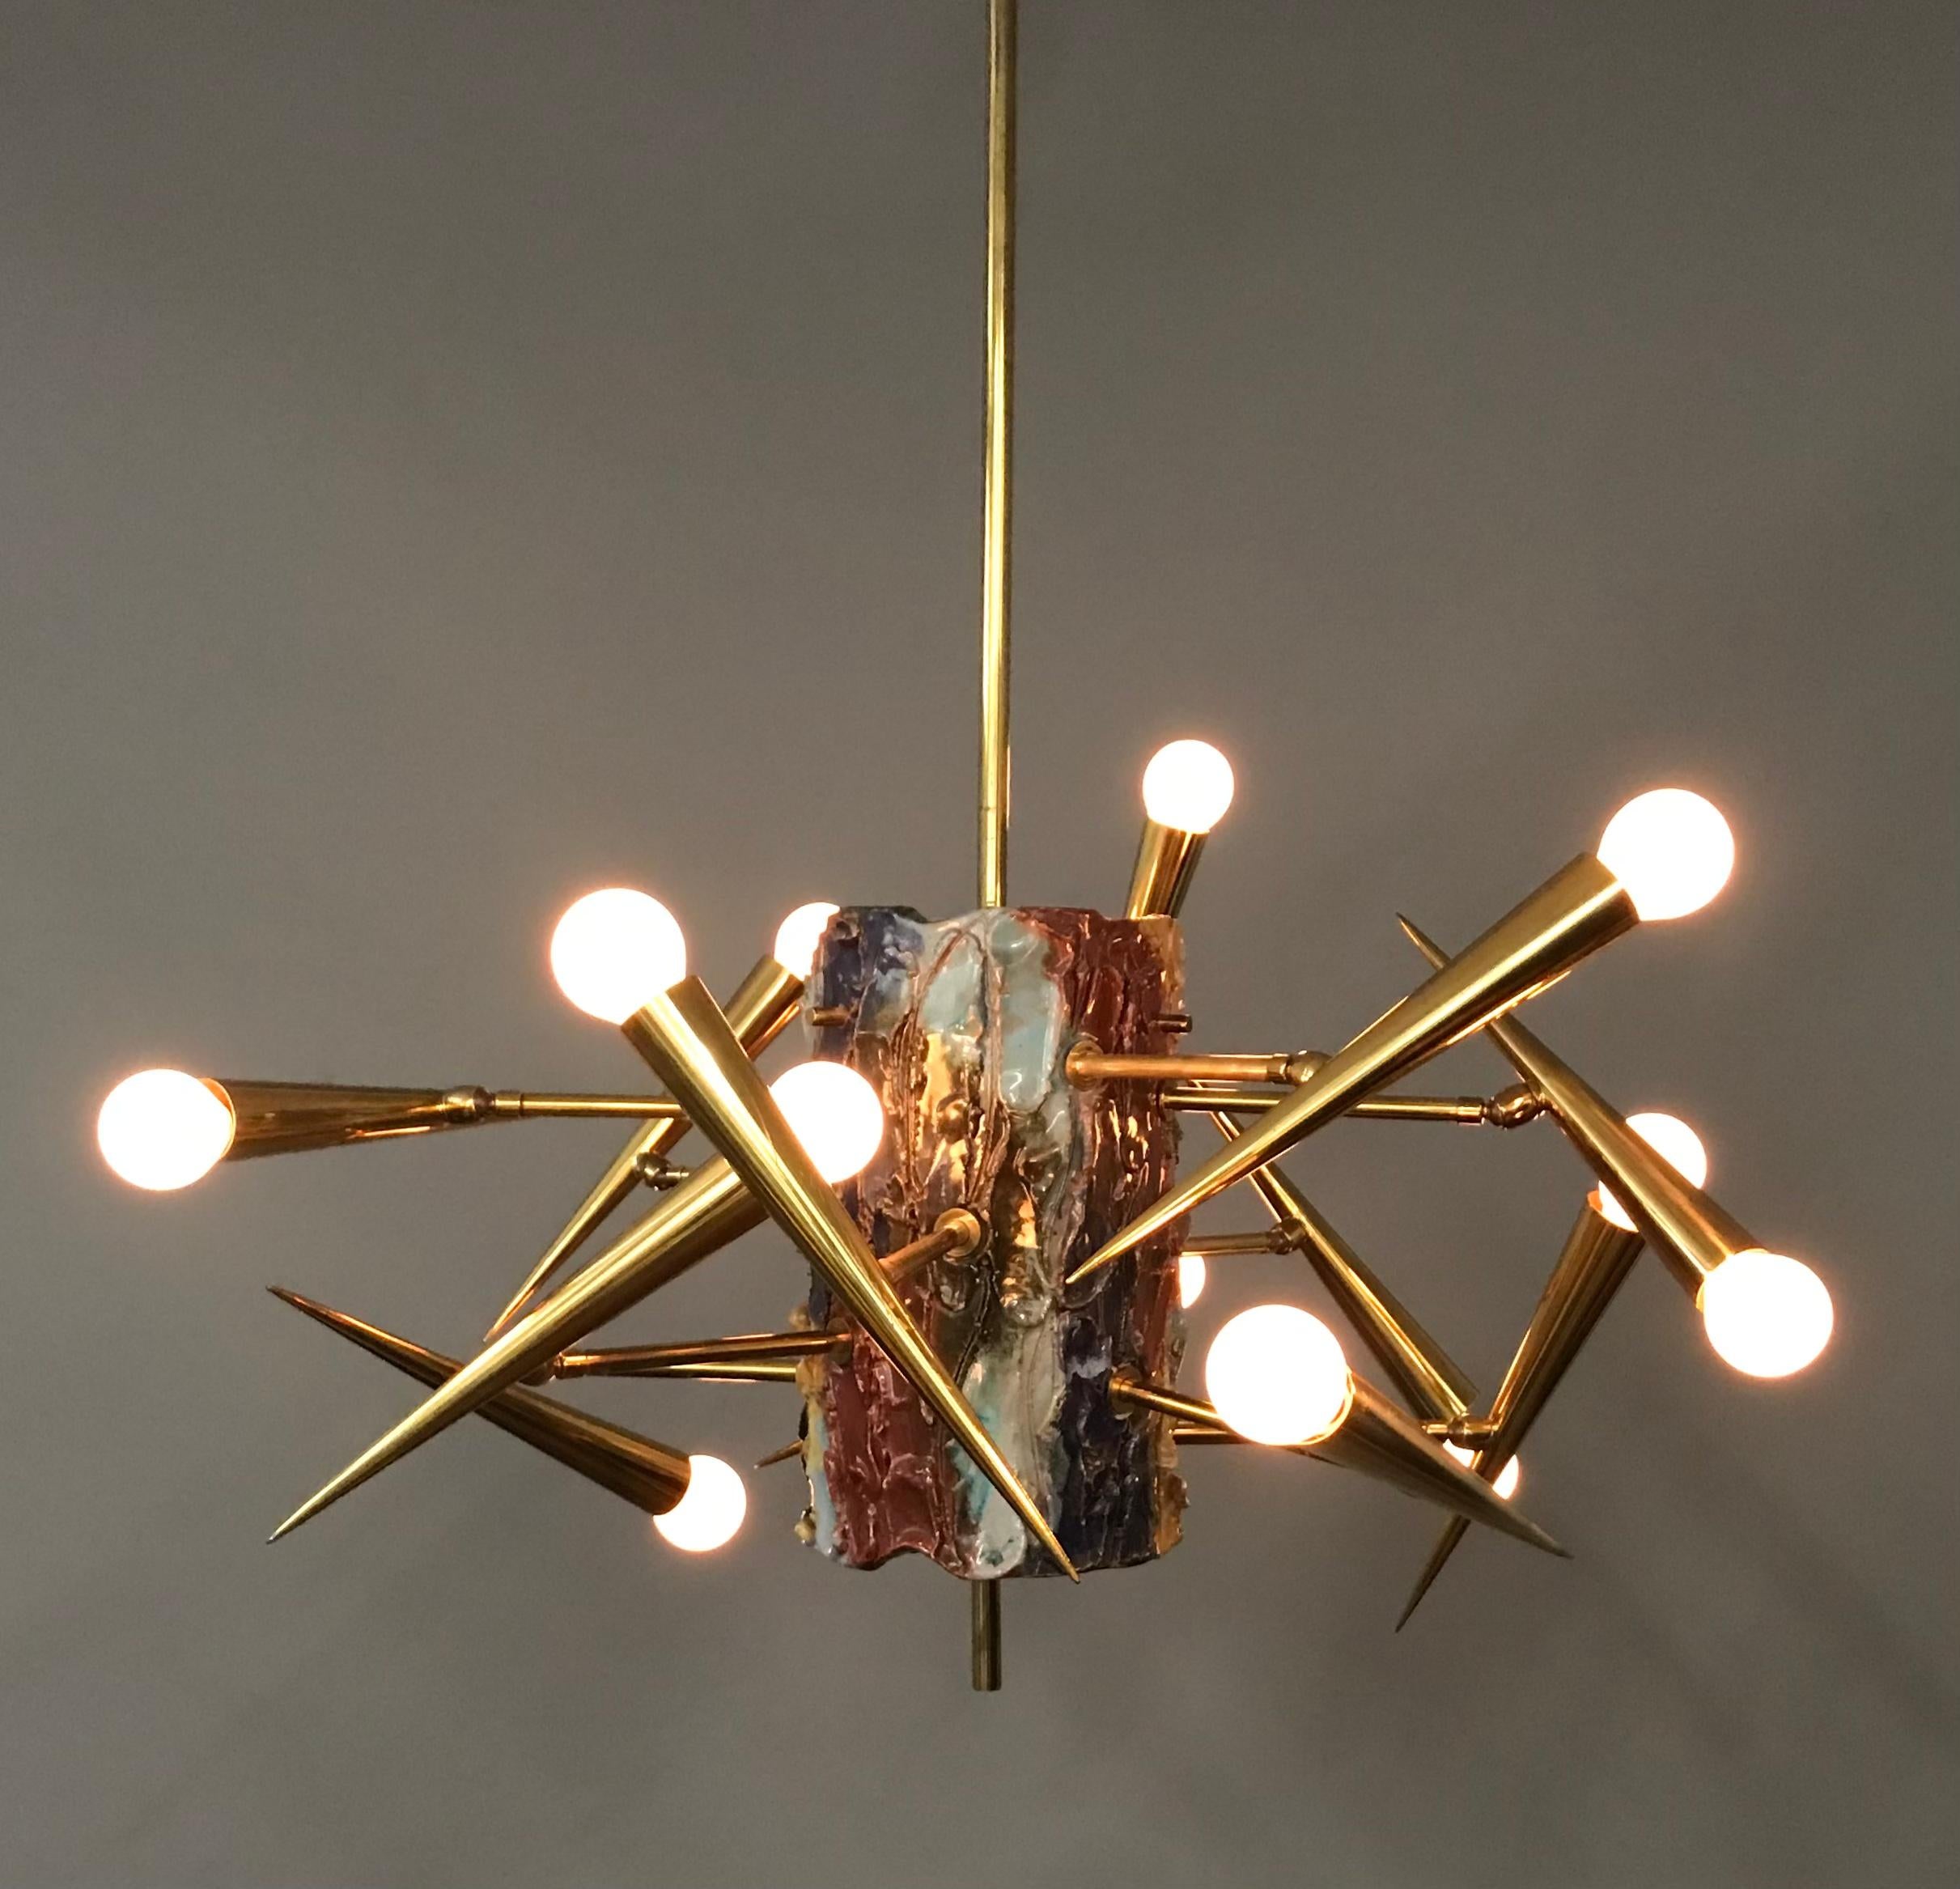 Leoncillo Leonardi's ceiling lamp in ceramic and brass with adjustable lights 6